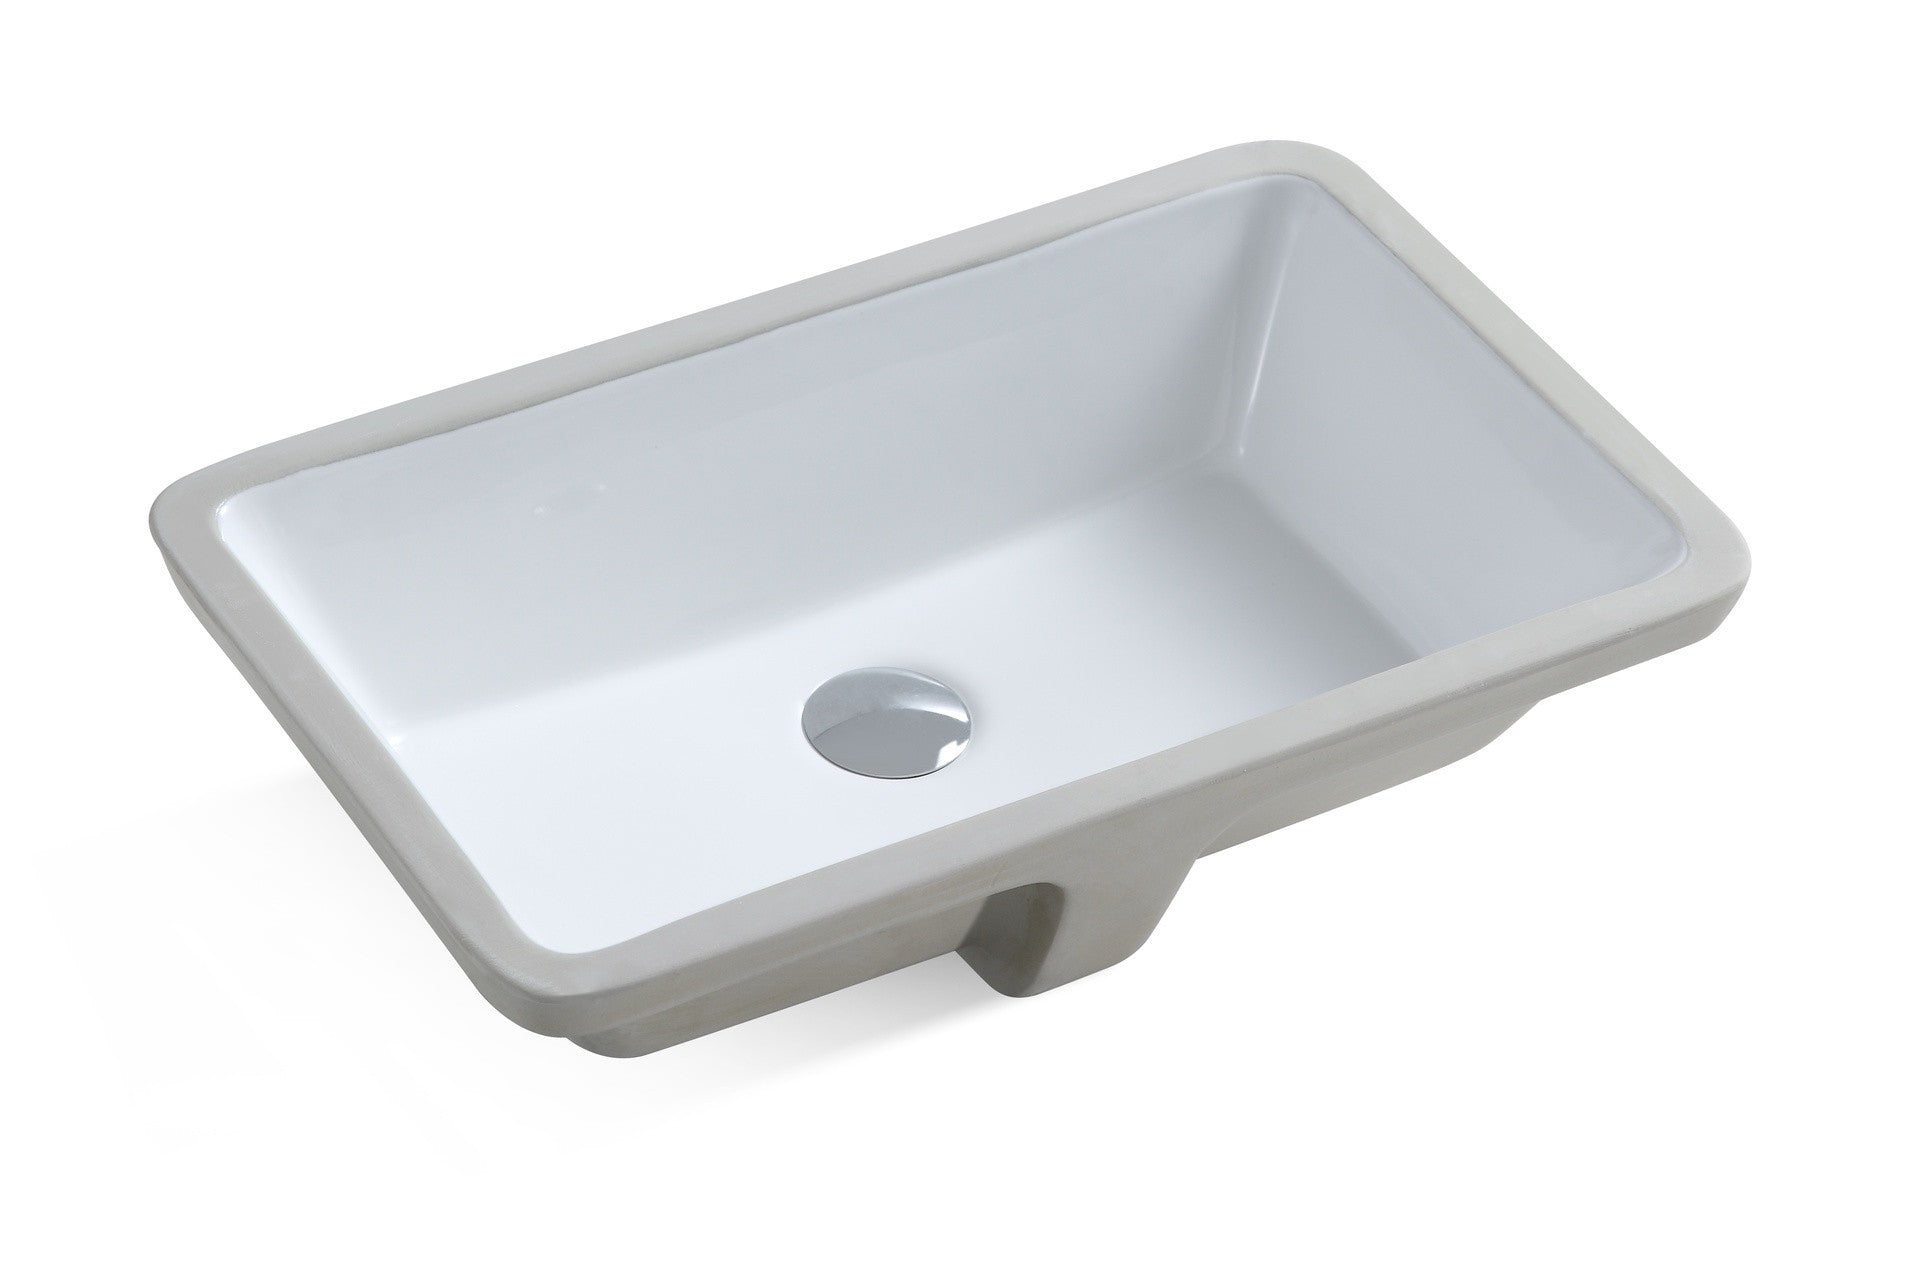 BASIN PU5334 - Premium Quality Basin With Sleek Design, Ideal for Bathrooms and Kitchens